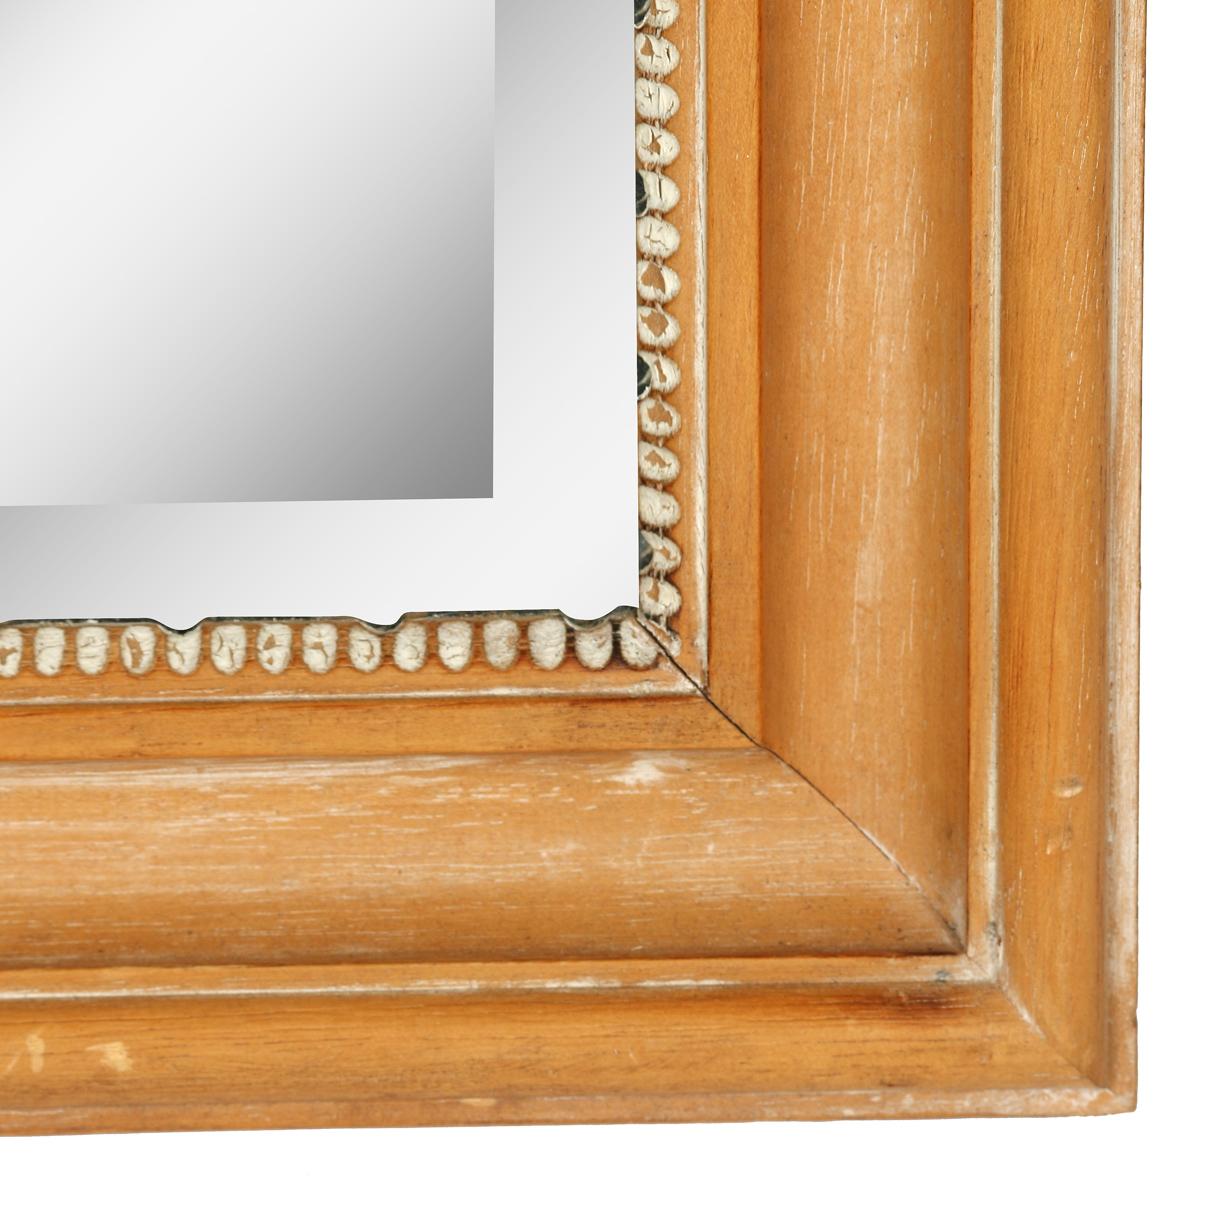 This large Rococo style mirror made by La Barge has great detail without being overpowering. The bleached fruitwood frame is adorned with a shell and scroll motif at top., and the beveled glass is surrounded by an inner beaded molding. This piece